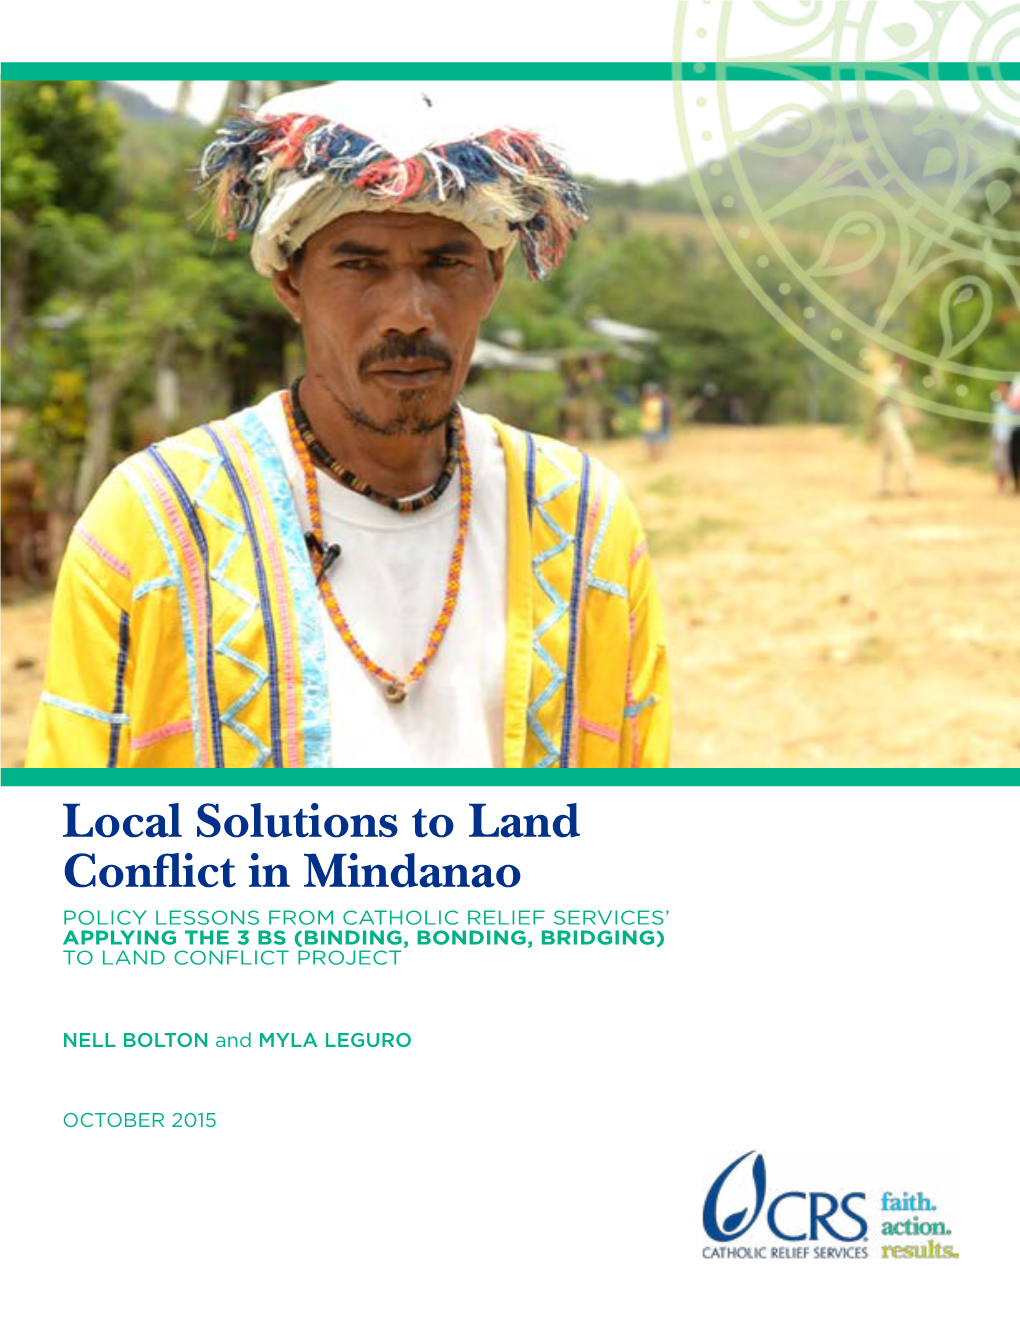 Local Solutions to Land Conflict in Mindanao POLICY LESSONS from CATHOLIC RELIEF SERVICES’ APPLYING the 3 BS (BINDING, BONDING, BRIDGING) to LAND CONFLICT PROJECT